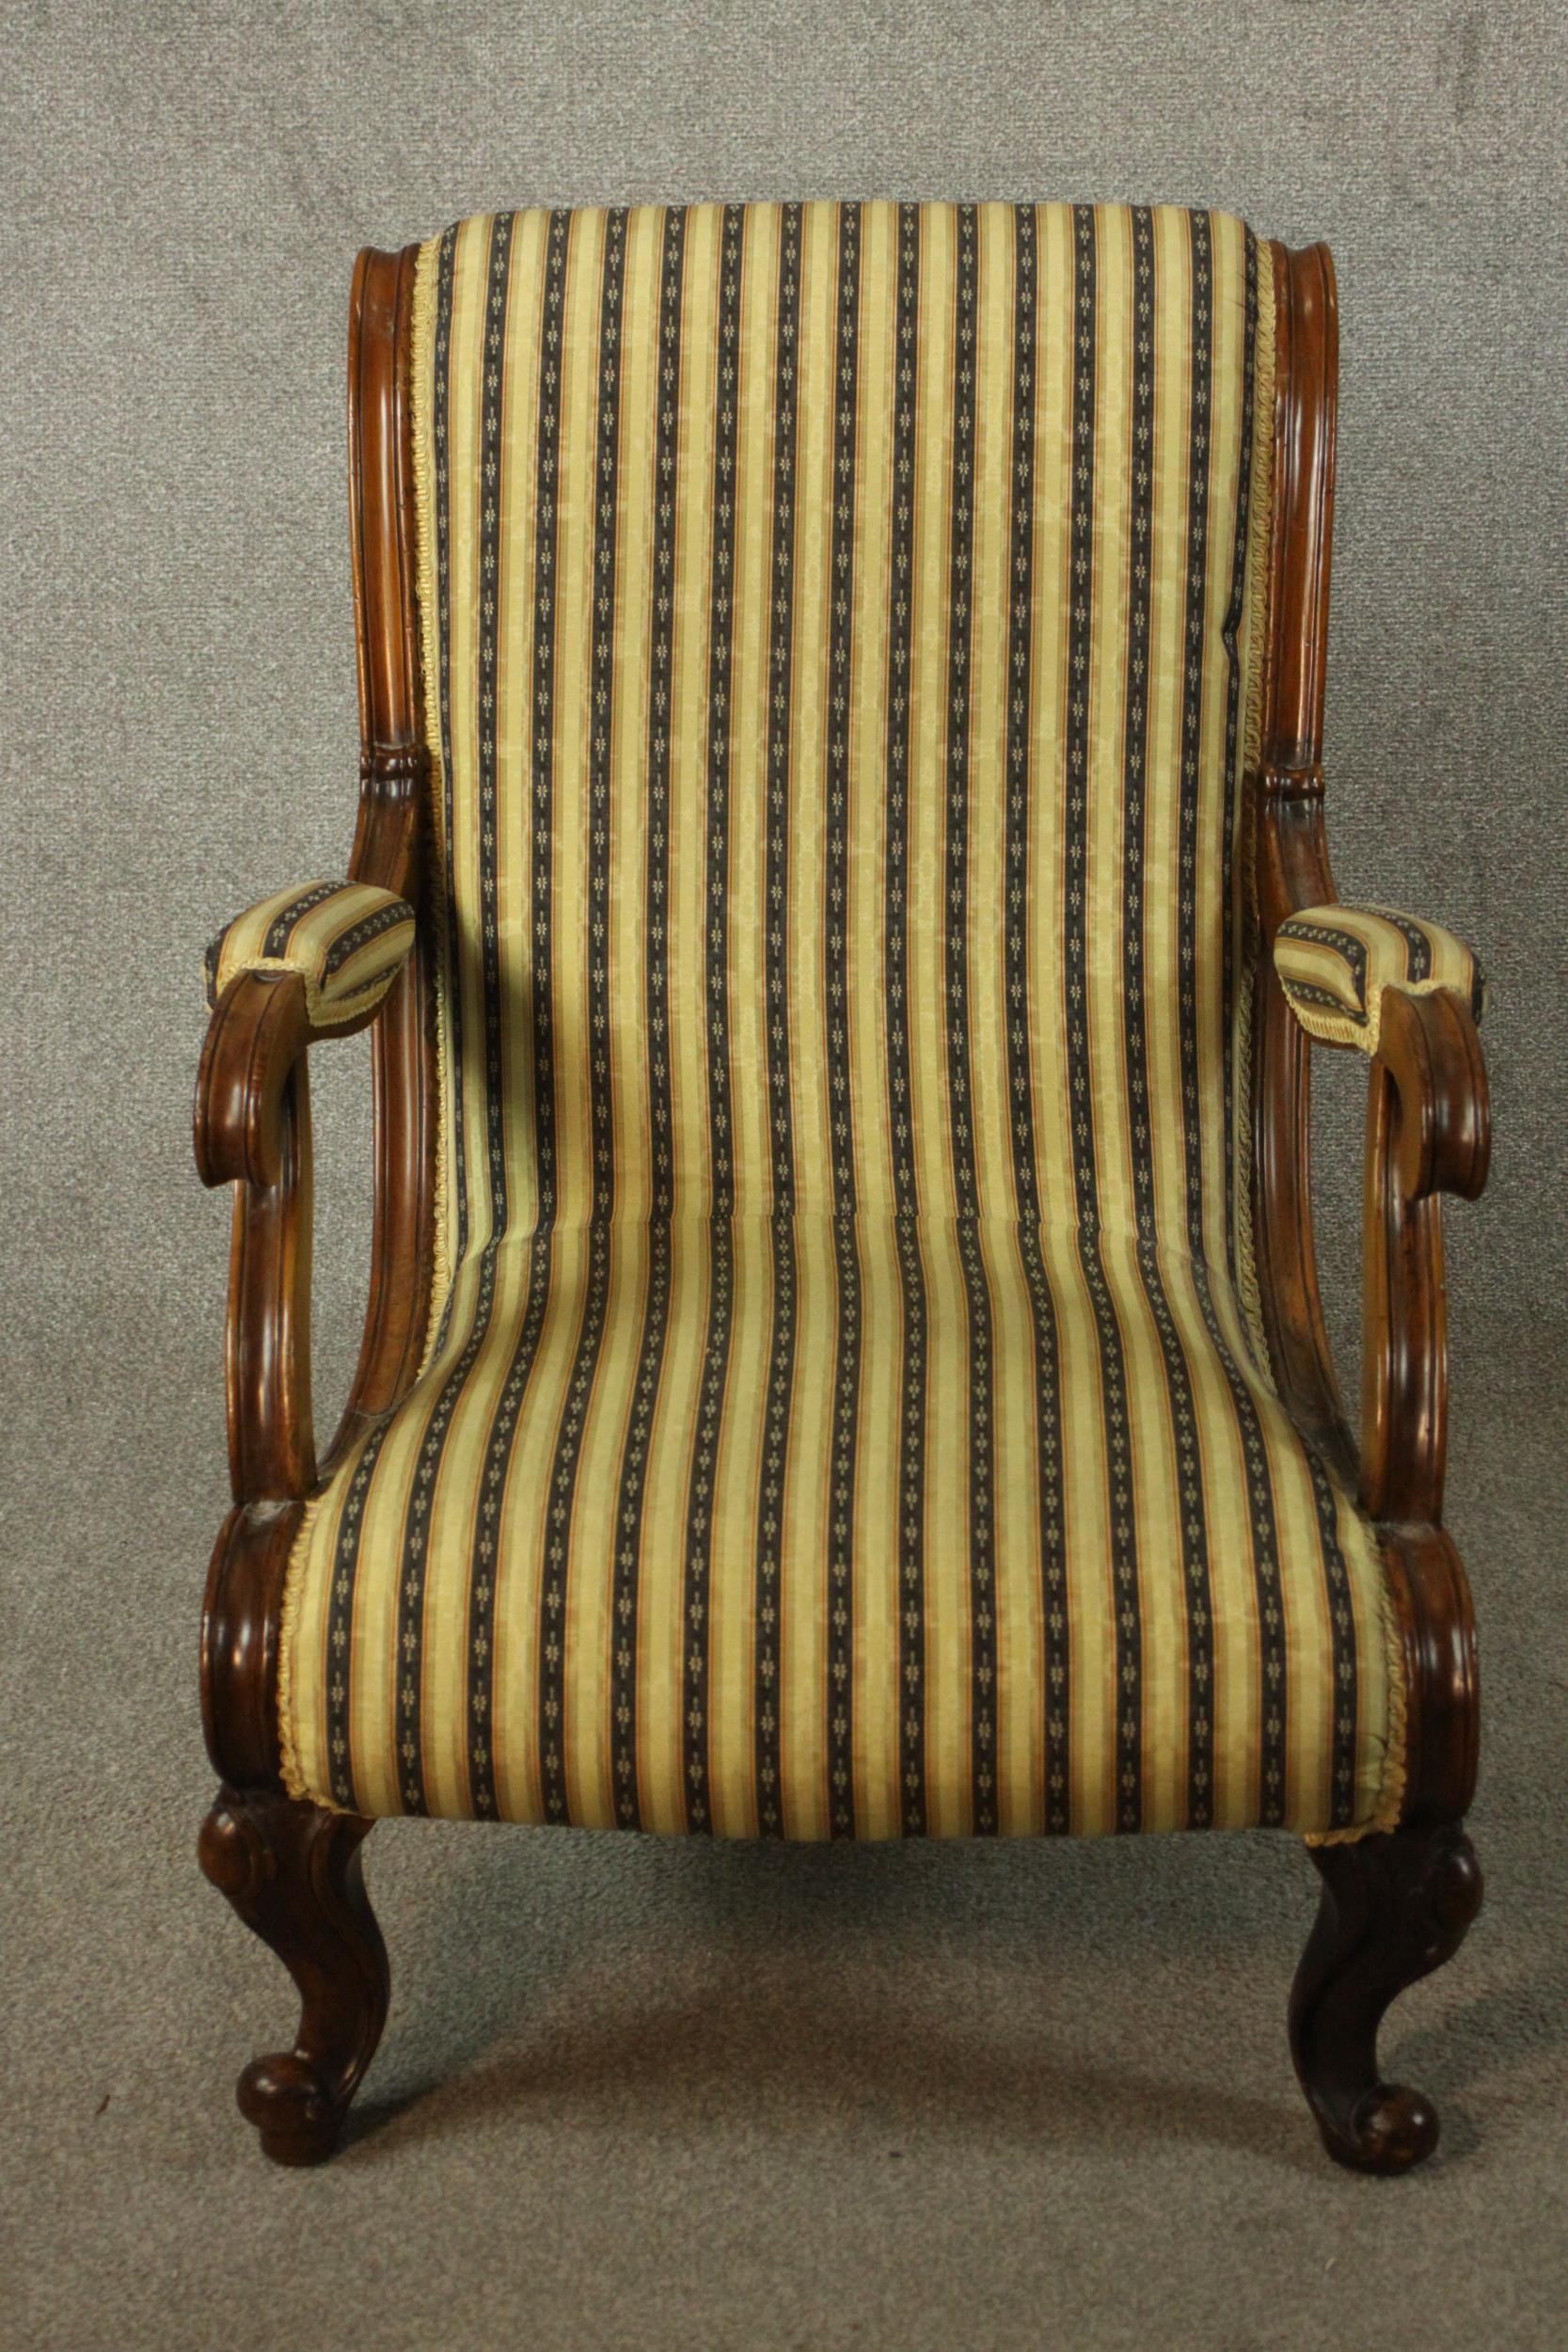 Two similar Victorian walnut slipper chairs, with striped upholstery, one with open arms, on - Image 3 of 21